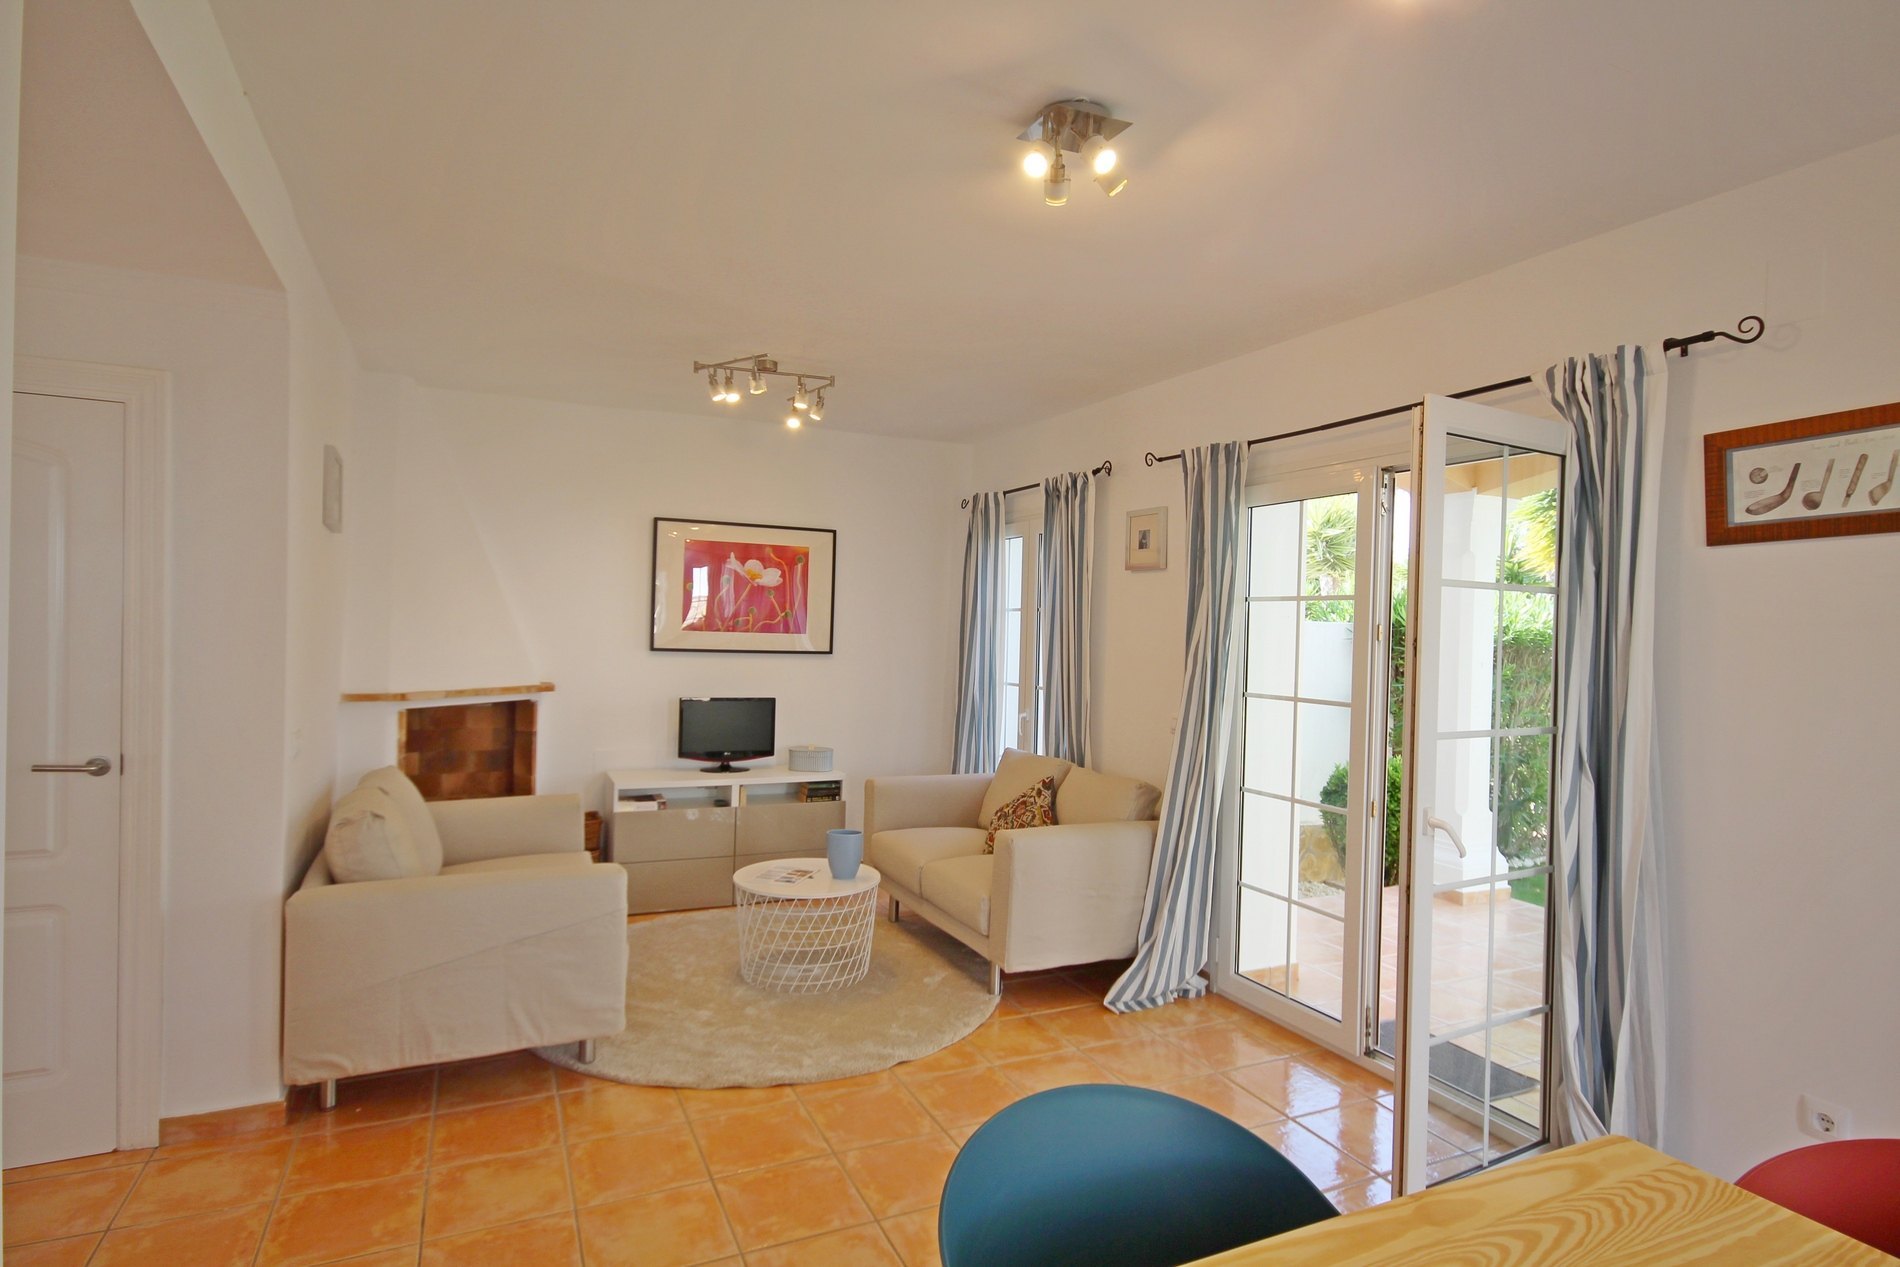 Beautiful Bungalow for Sale in Calpe